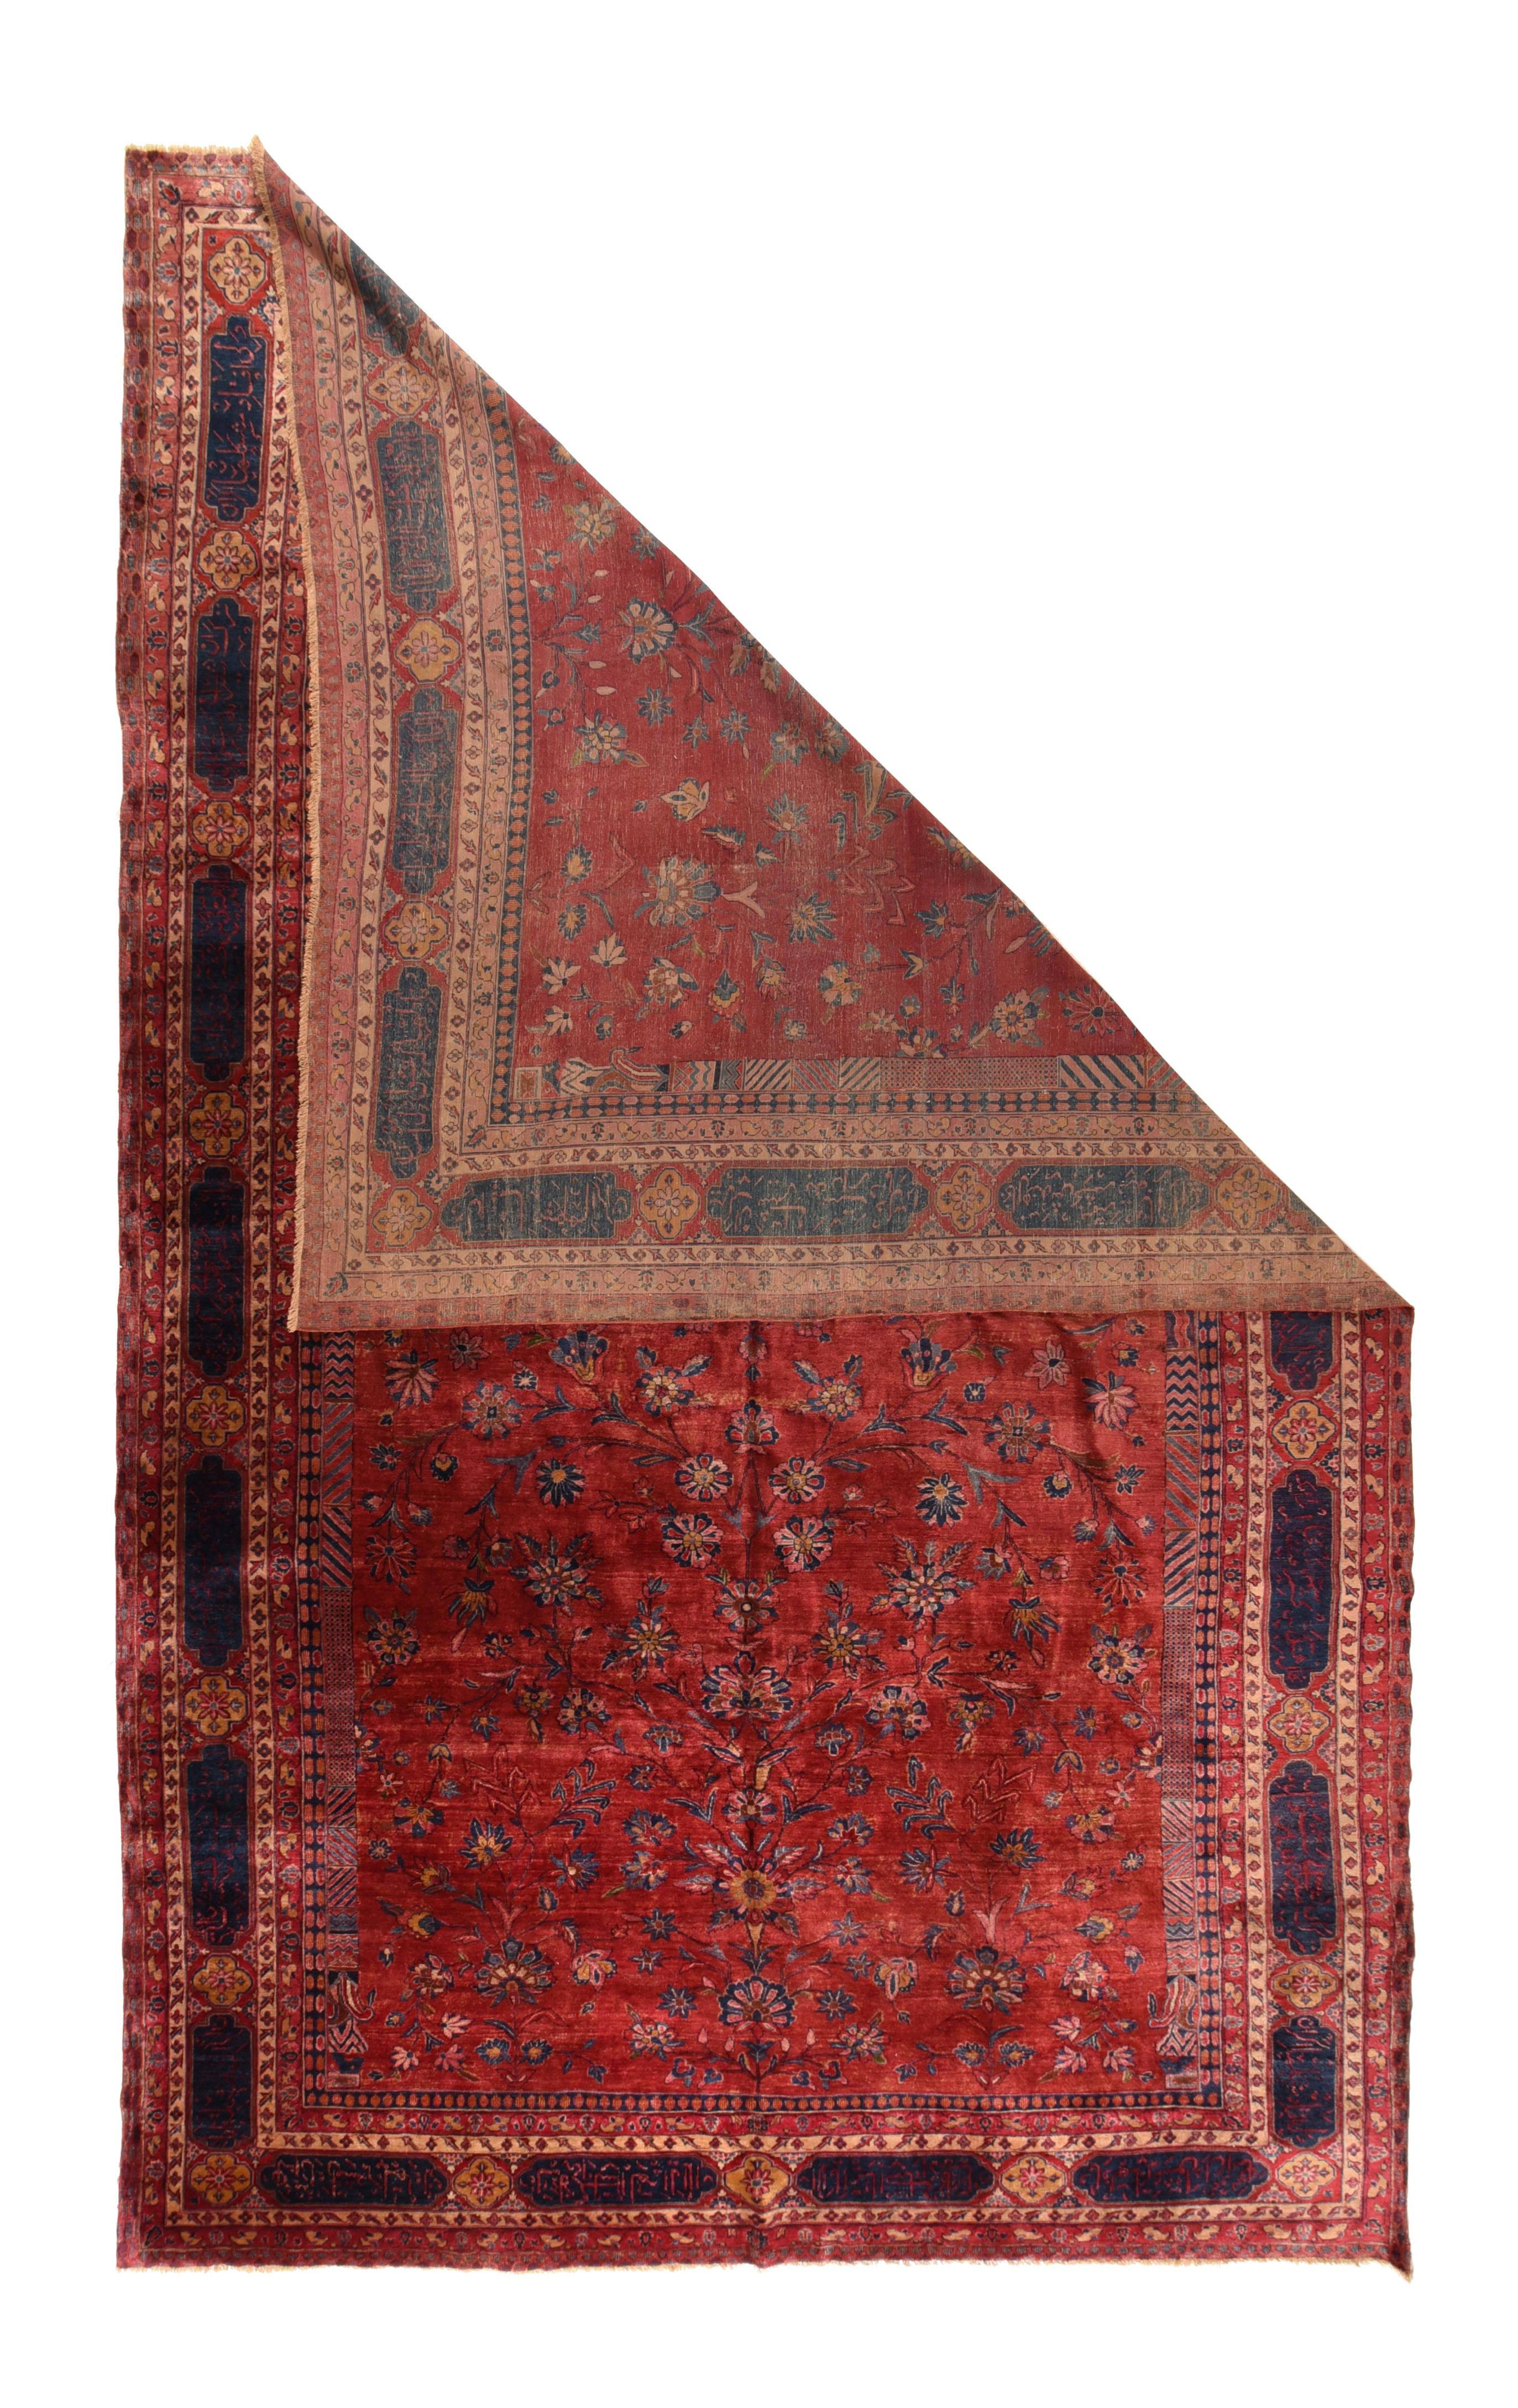 This quite finely woven Central Persian city carpet has a velvety pile of Manchester-spun Merino wool. The royal blue inscription cartouche and quatrefoil border frames the ruby red field with a small inscription octogramme developing stem, vines